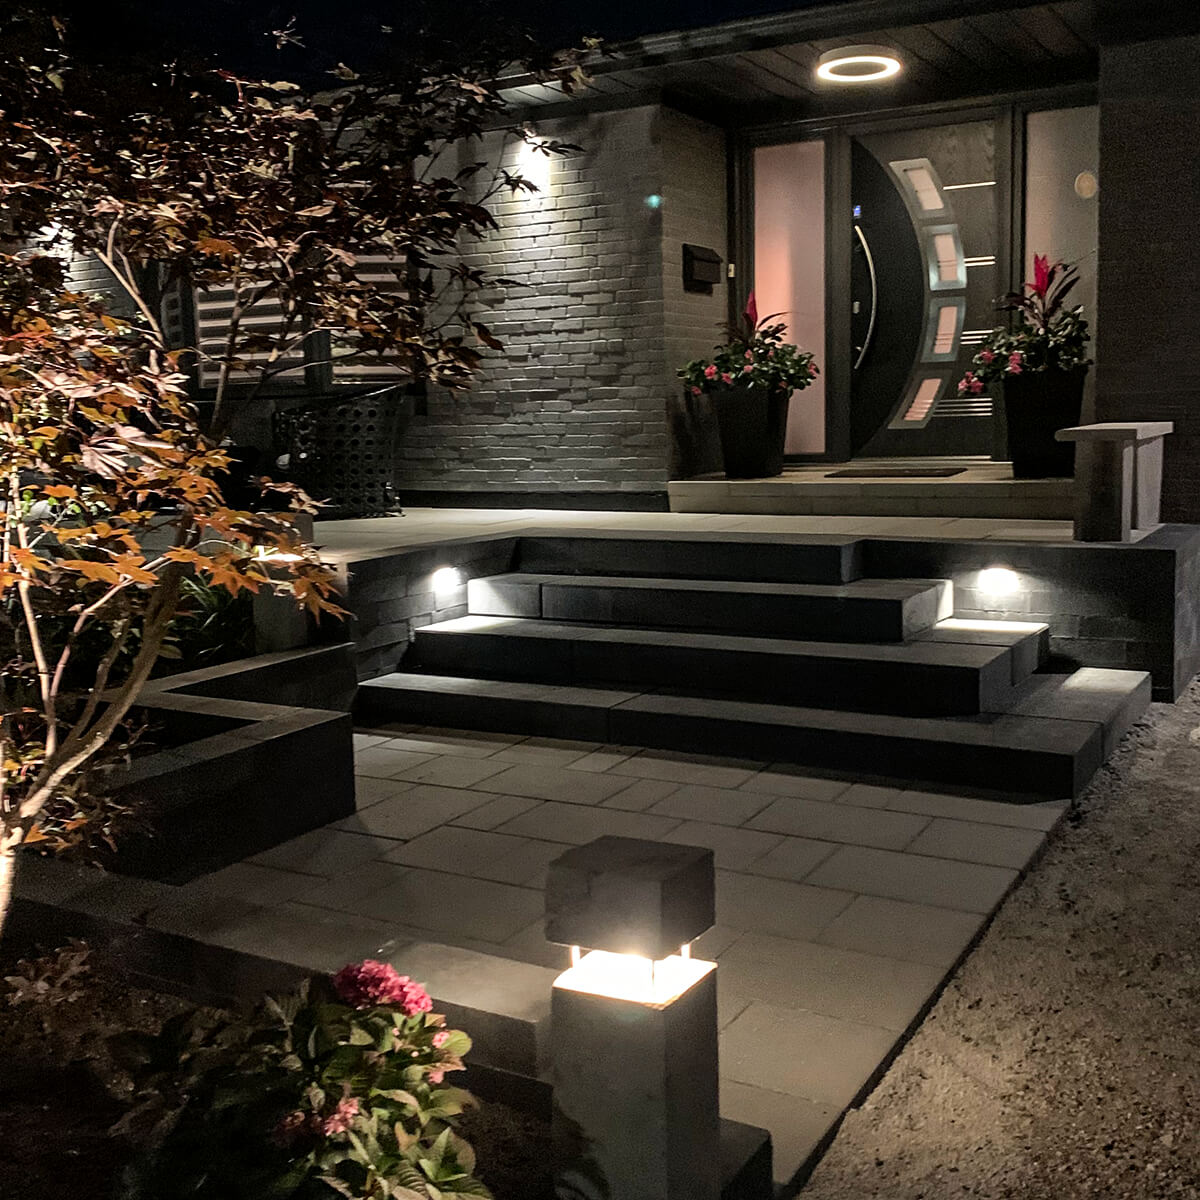 Front entrance of a modern-looking house at night with stone steps and landscape lighting